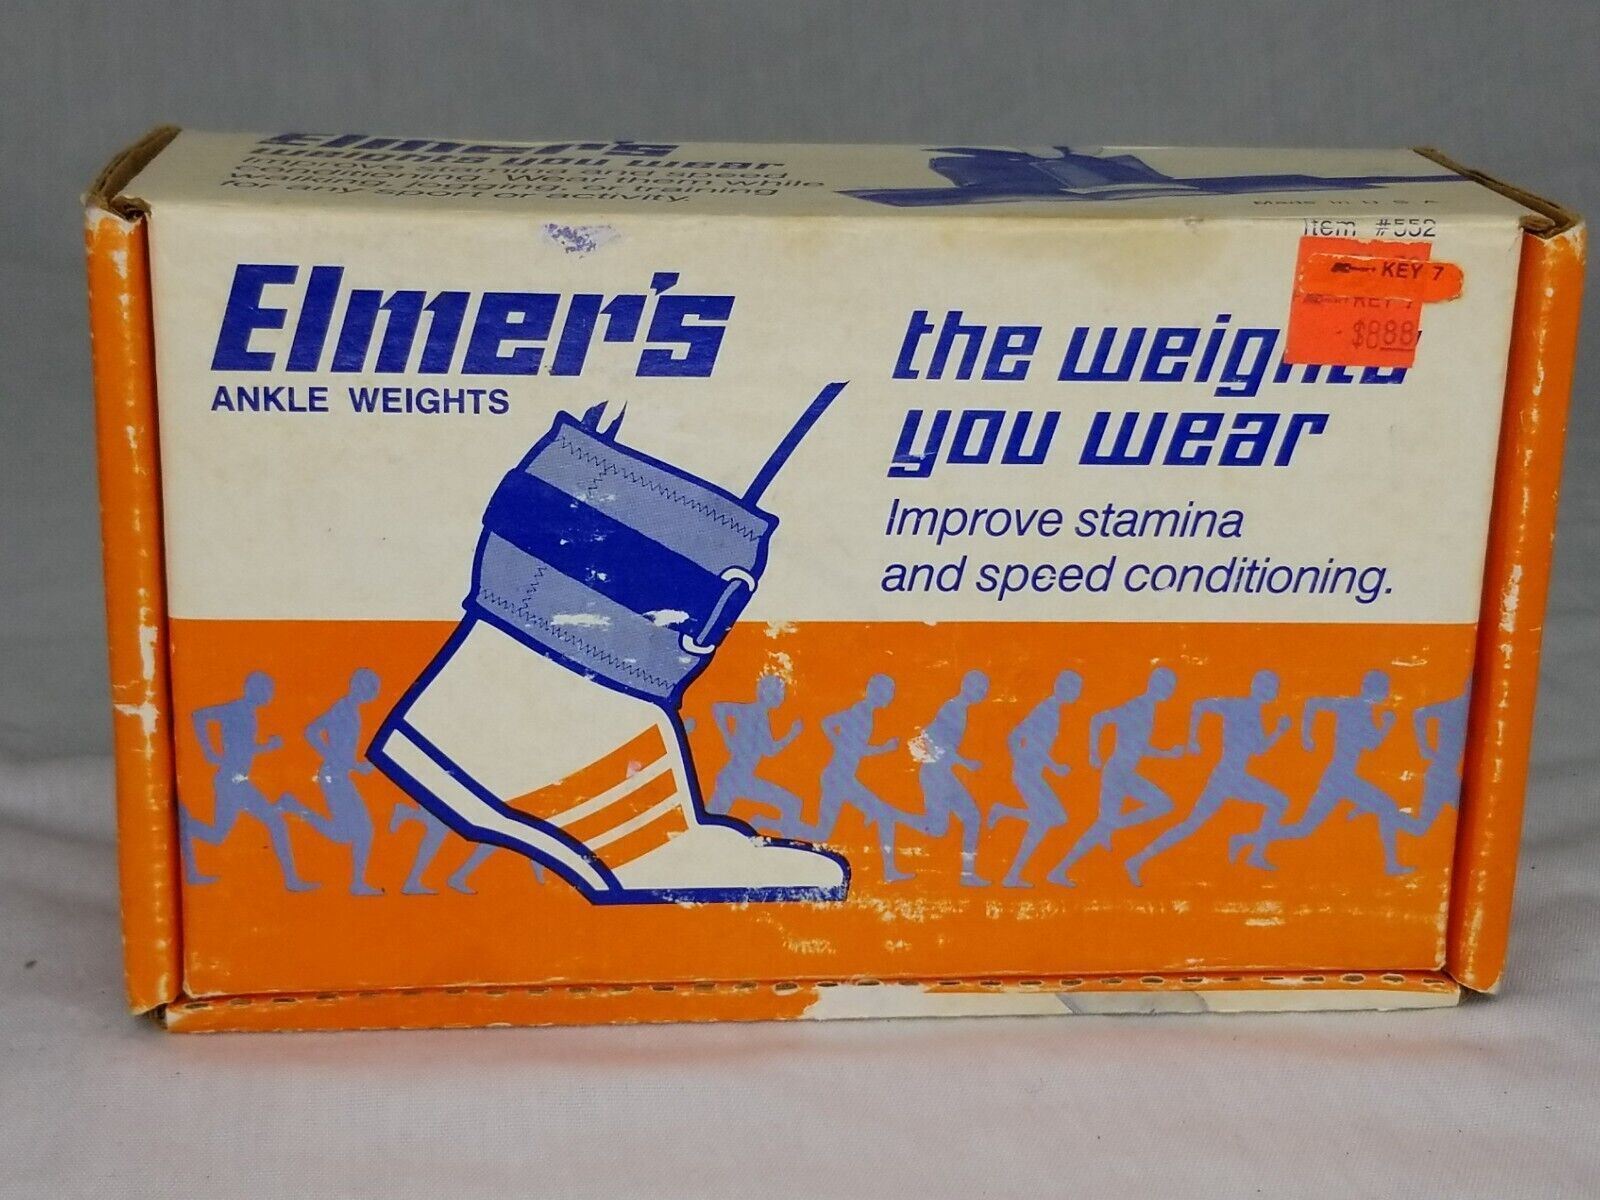 Vintage Ankle Weights Elmer's Vinyl Ankle Weights 5lb C3